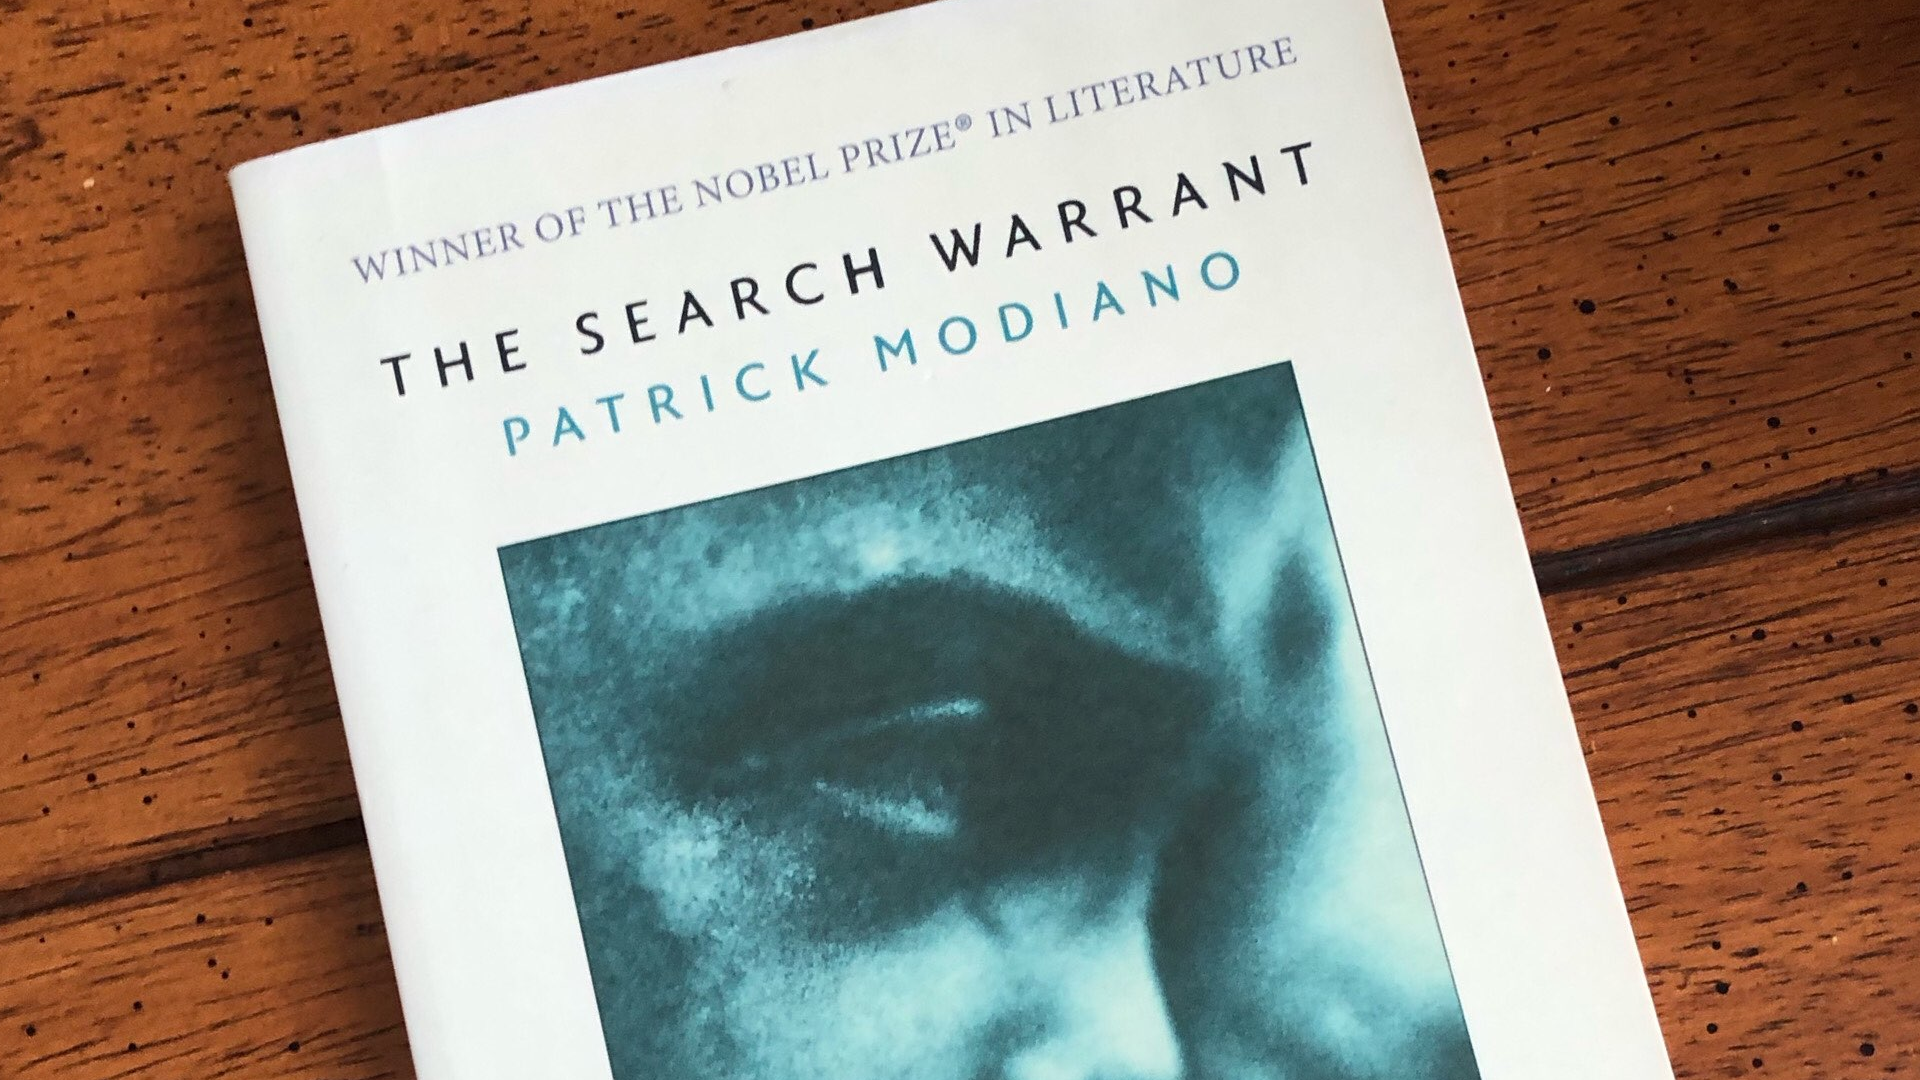 The Search Warrant by Patrick Modiano